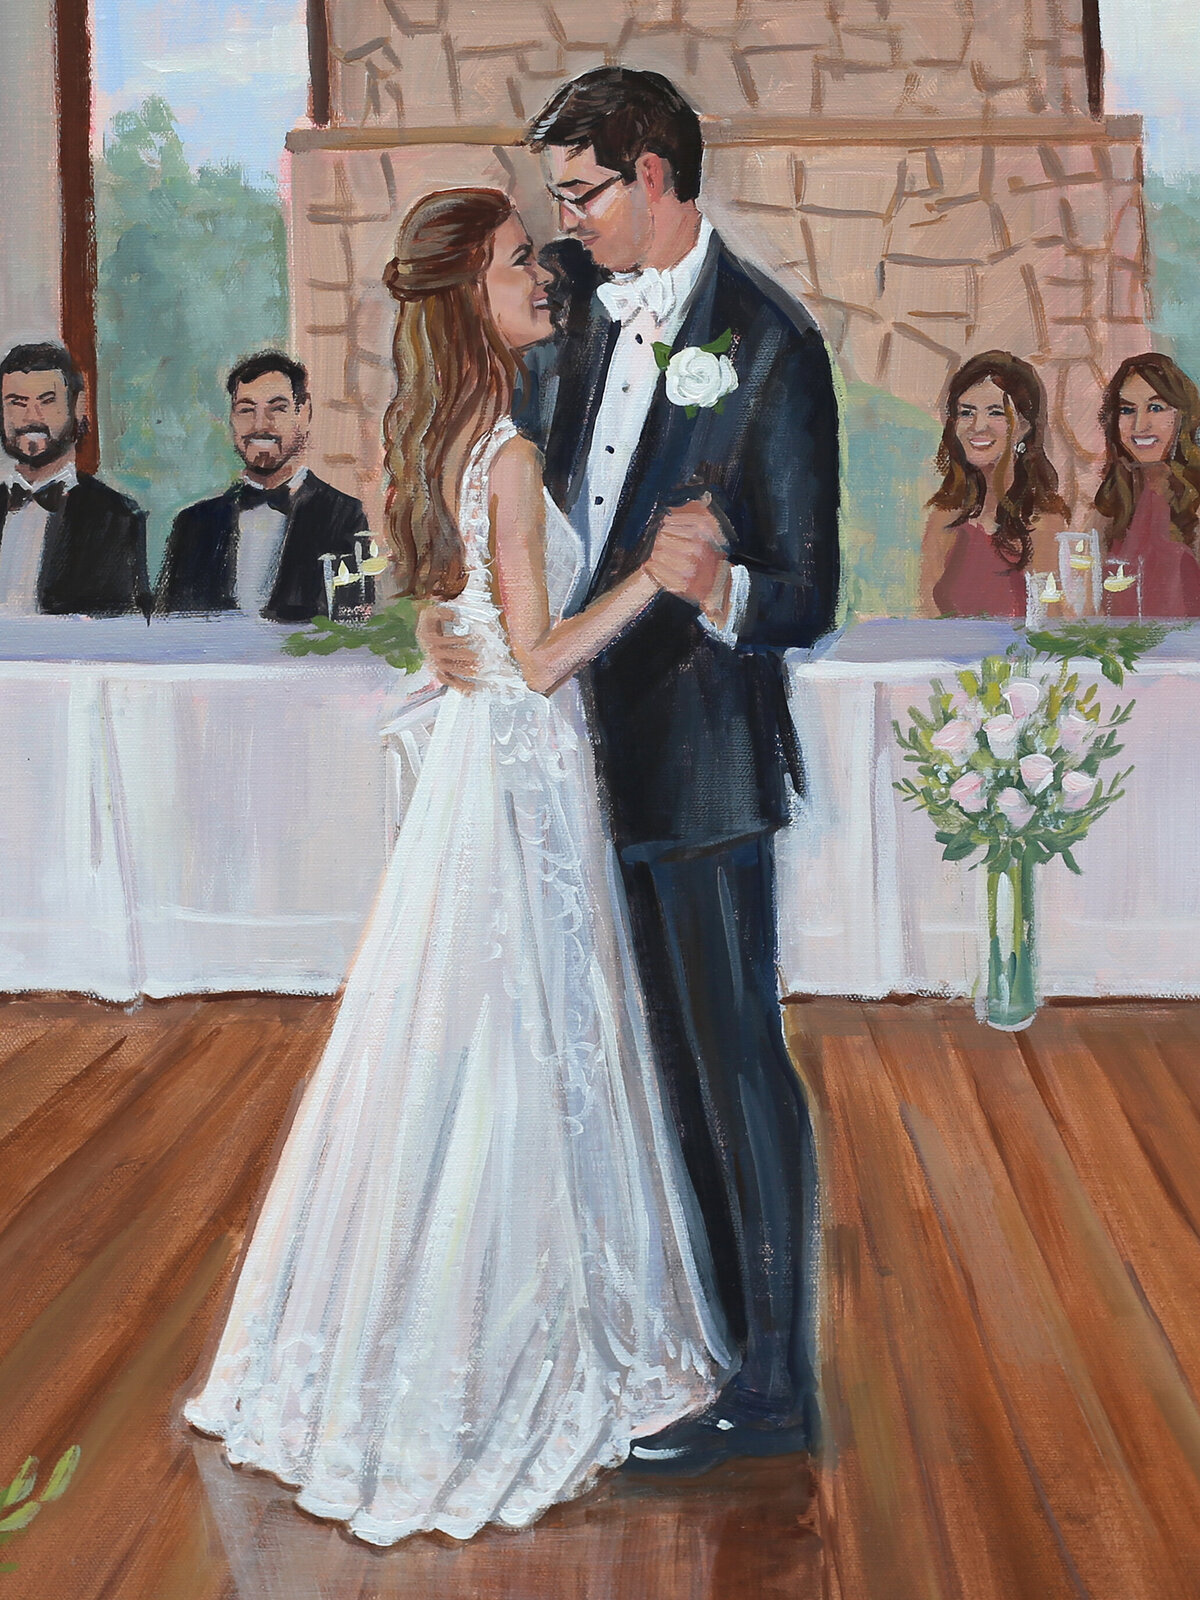 Carol Moore, Wedding Painting, Commission from Photos, detail 2